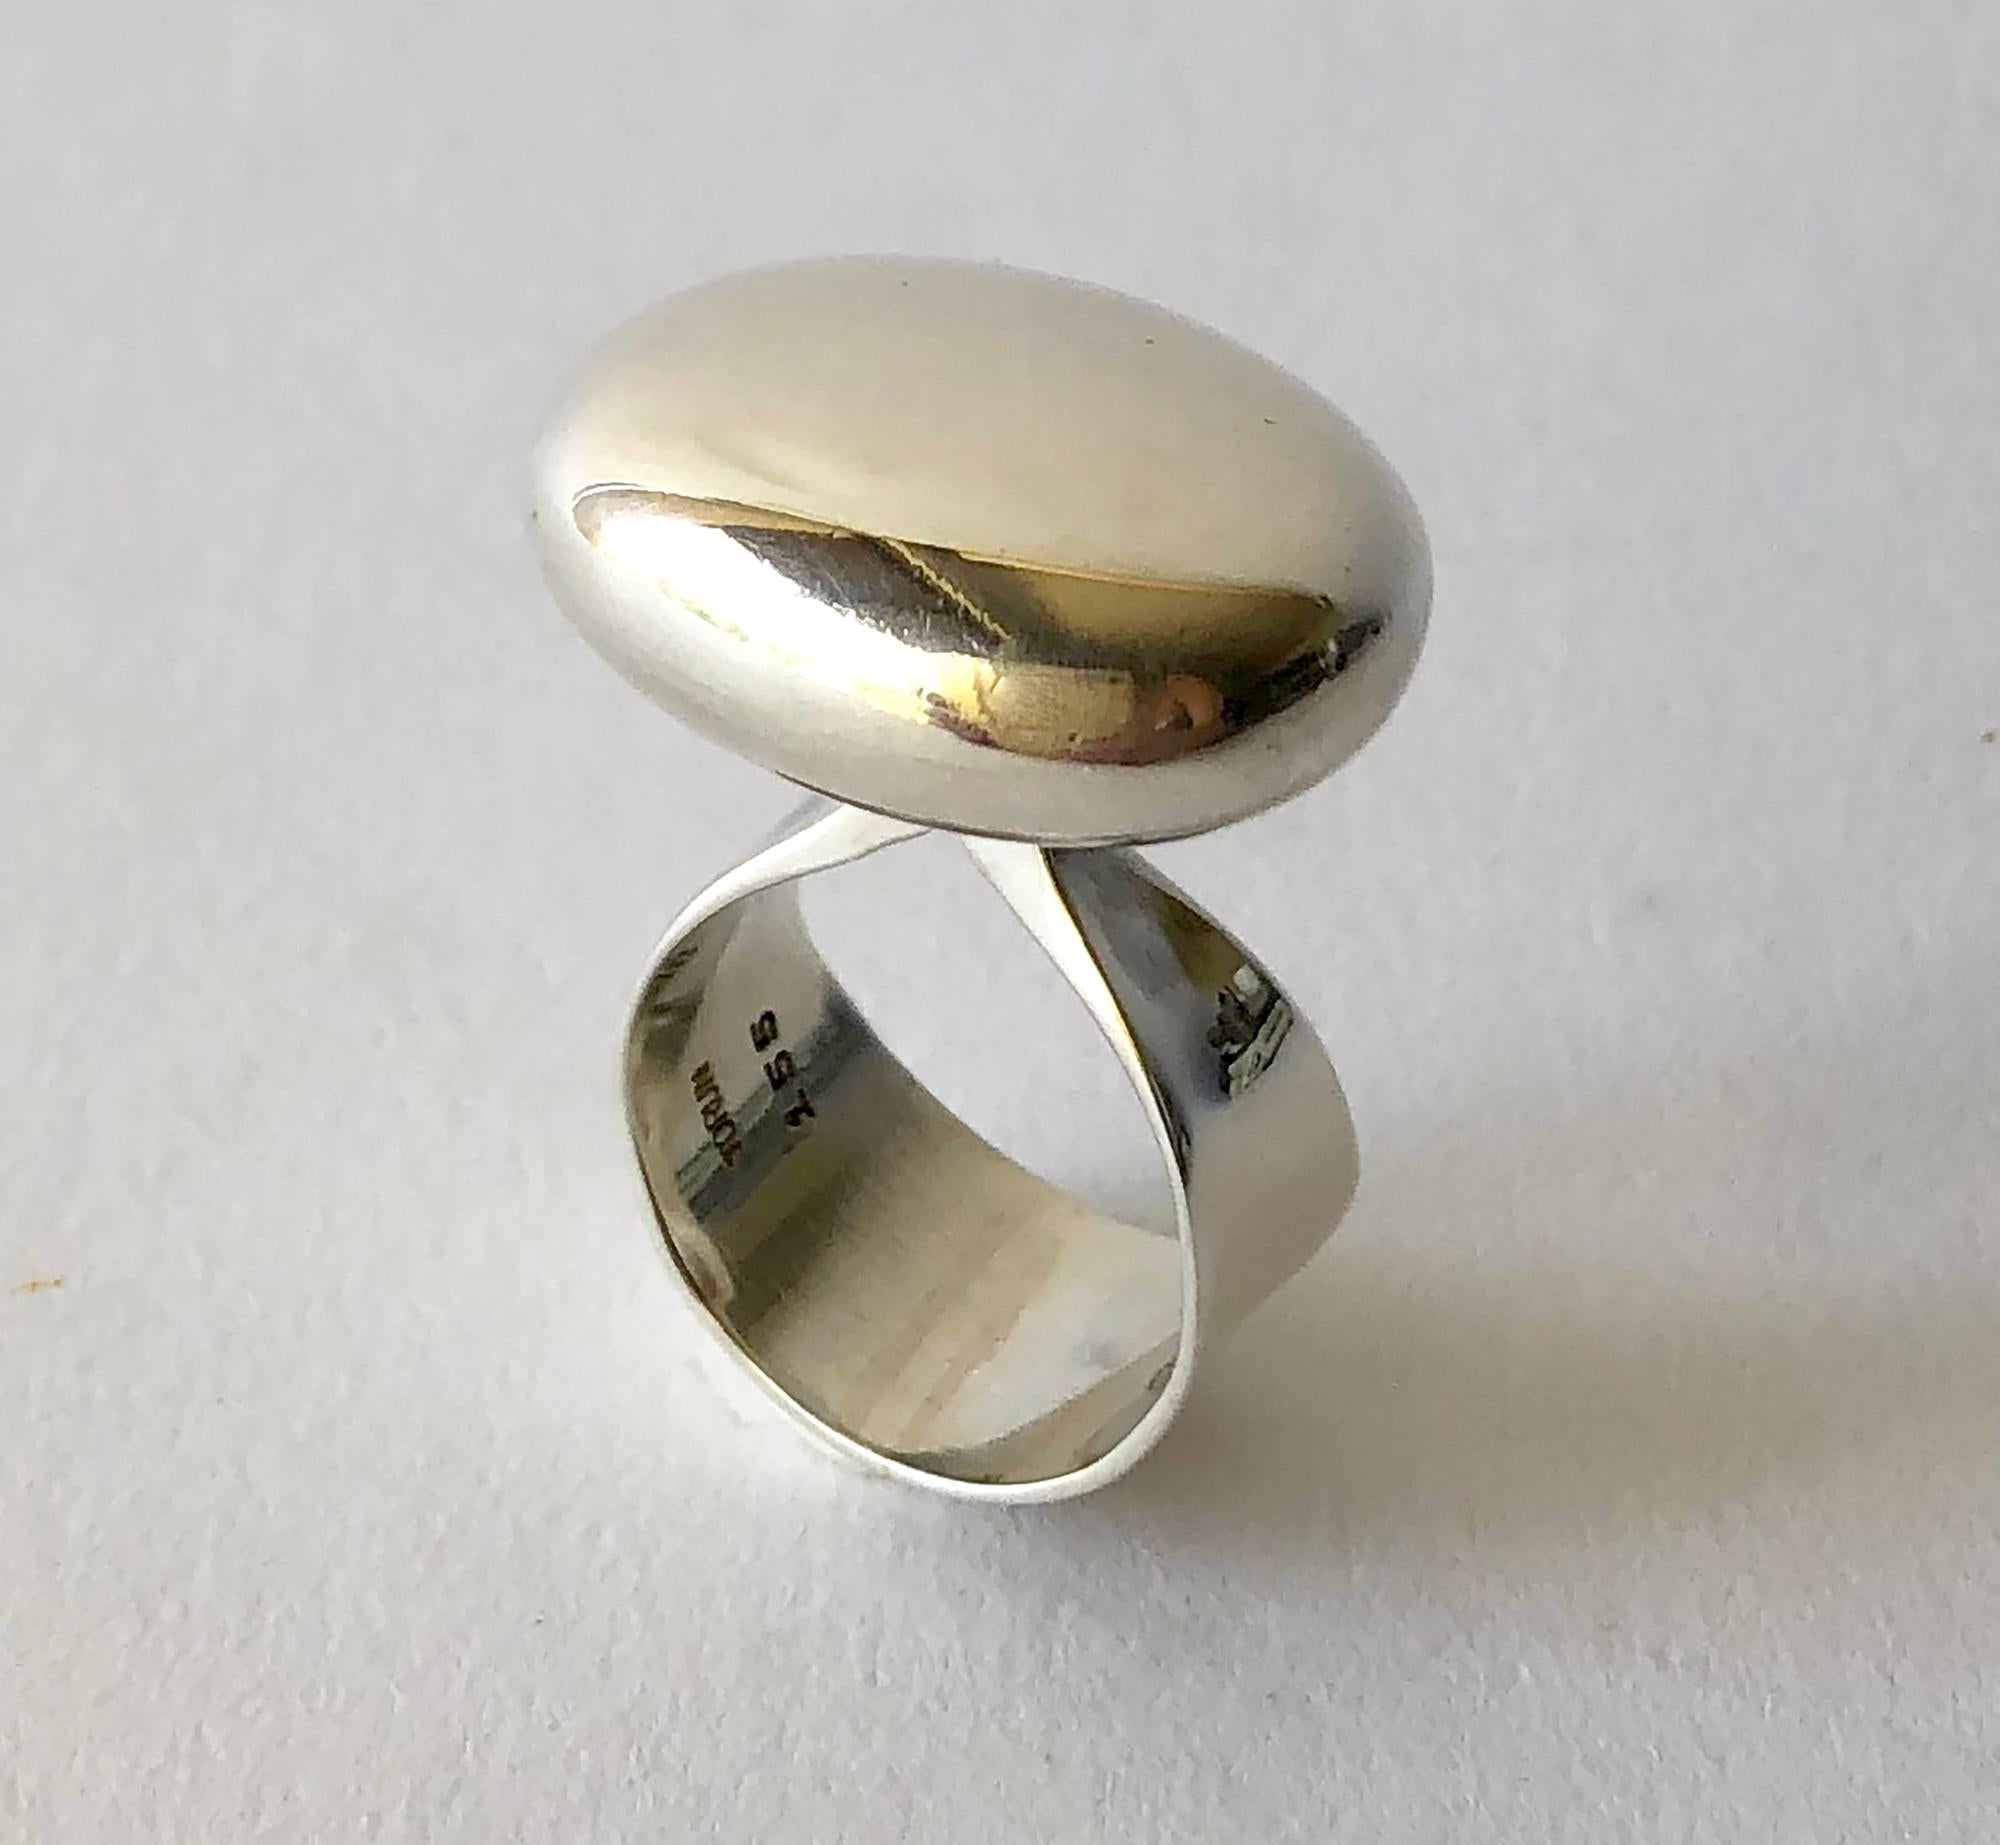 Mirror polish sterling silver ring designed by Vivianna Torun Bulow-Hube for Georg Jensen, circa 1970's.  Ring is a finger size 8 and is signed with the Jensen dotted hallmark, Torun, Denmark, 155.  In very good vintage condition showing wear